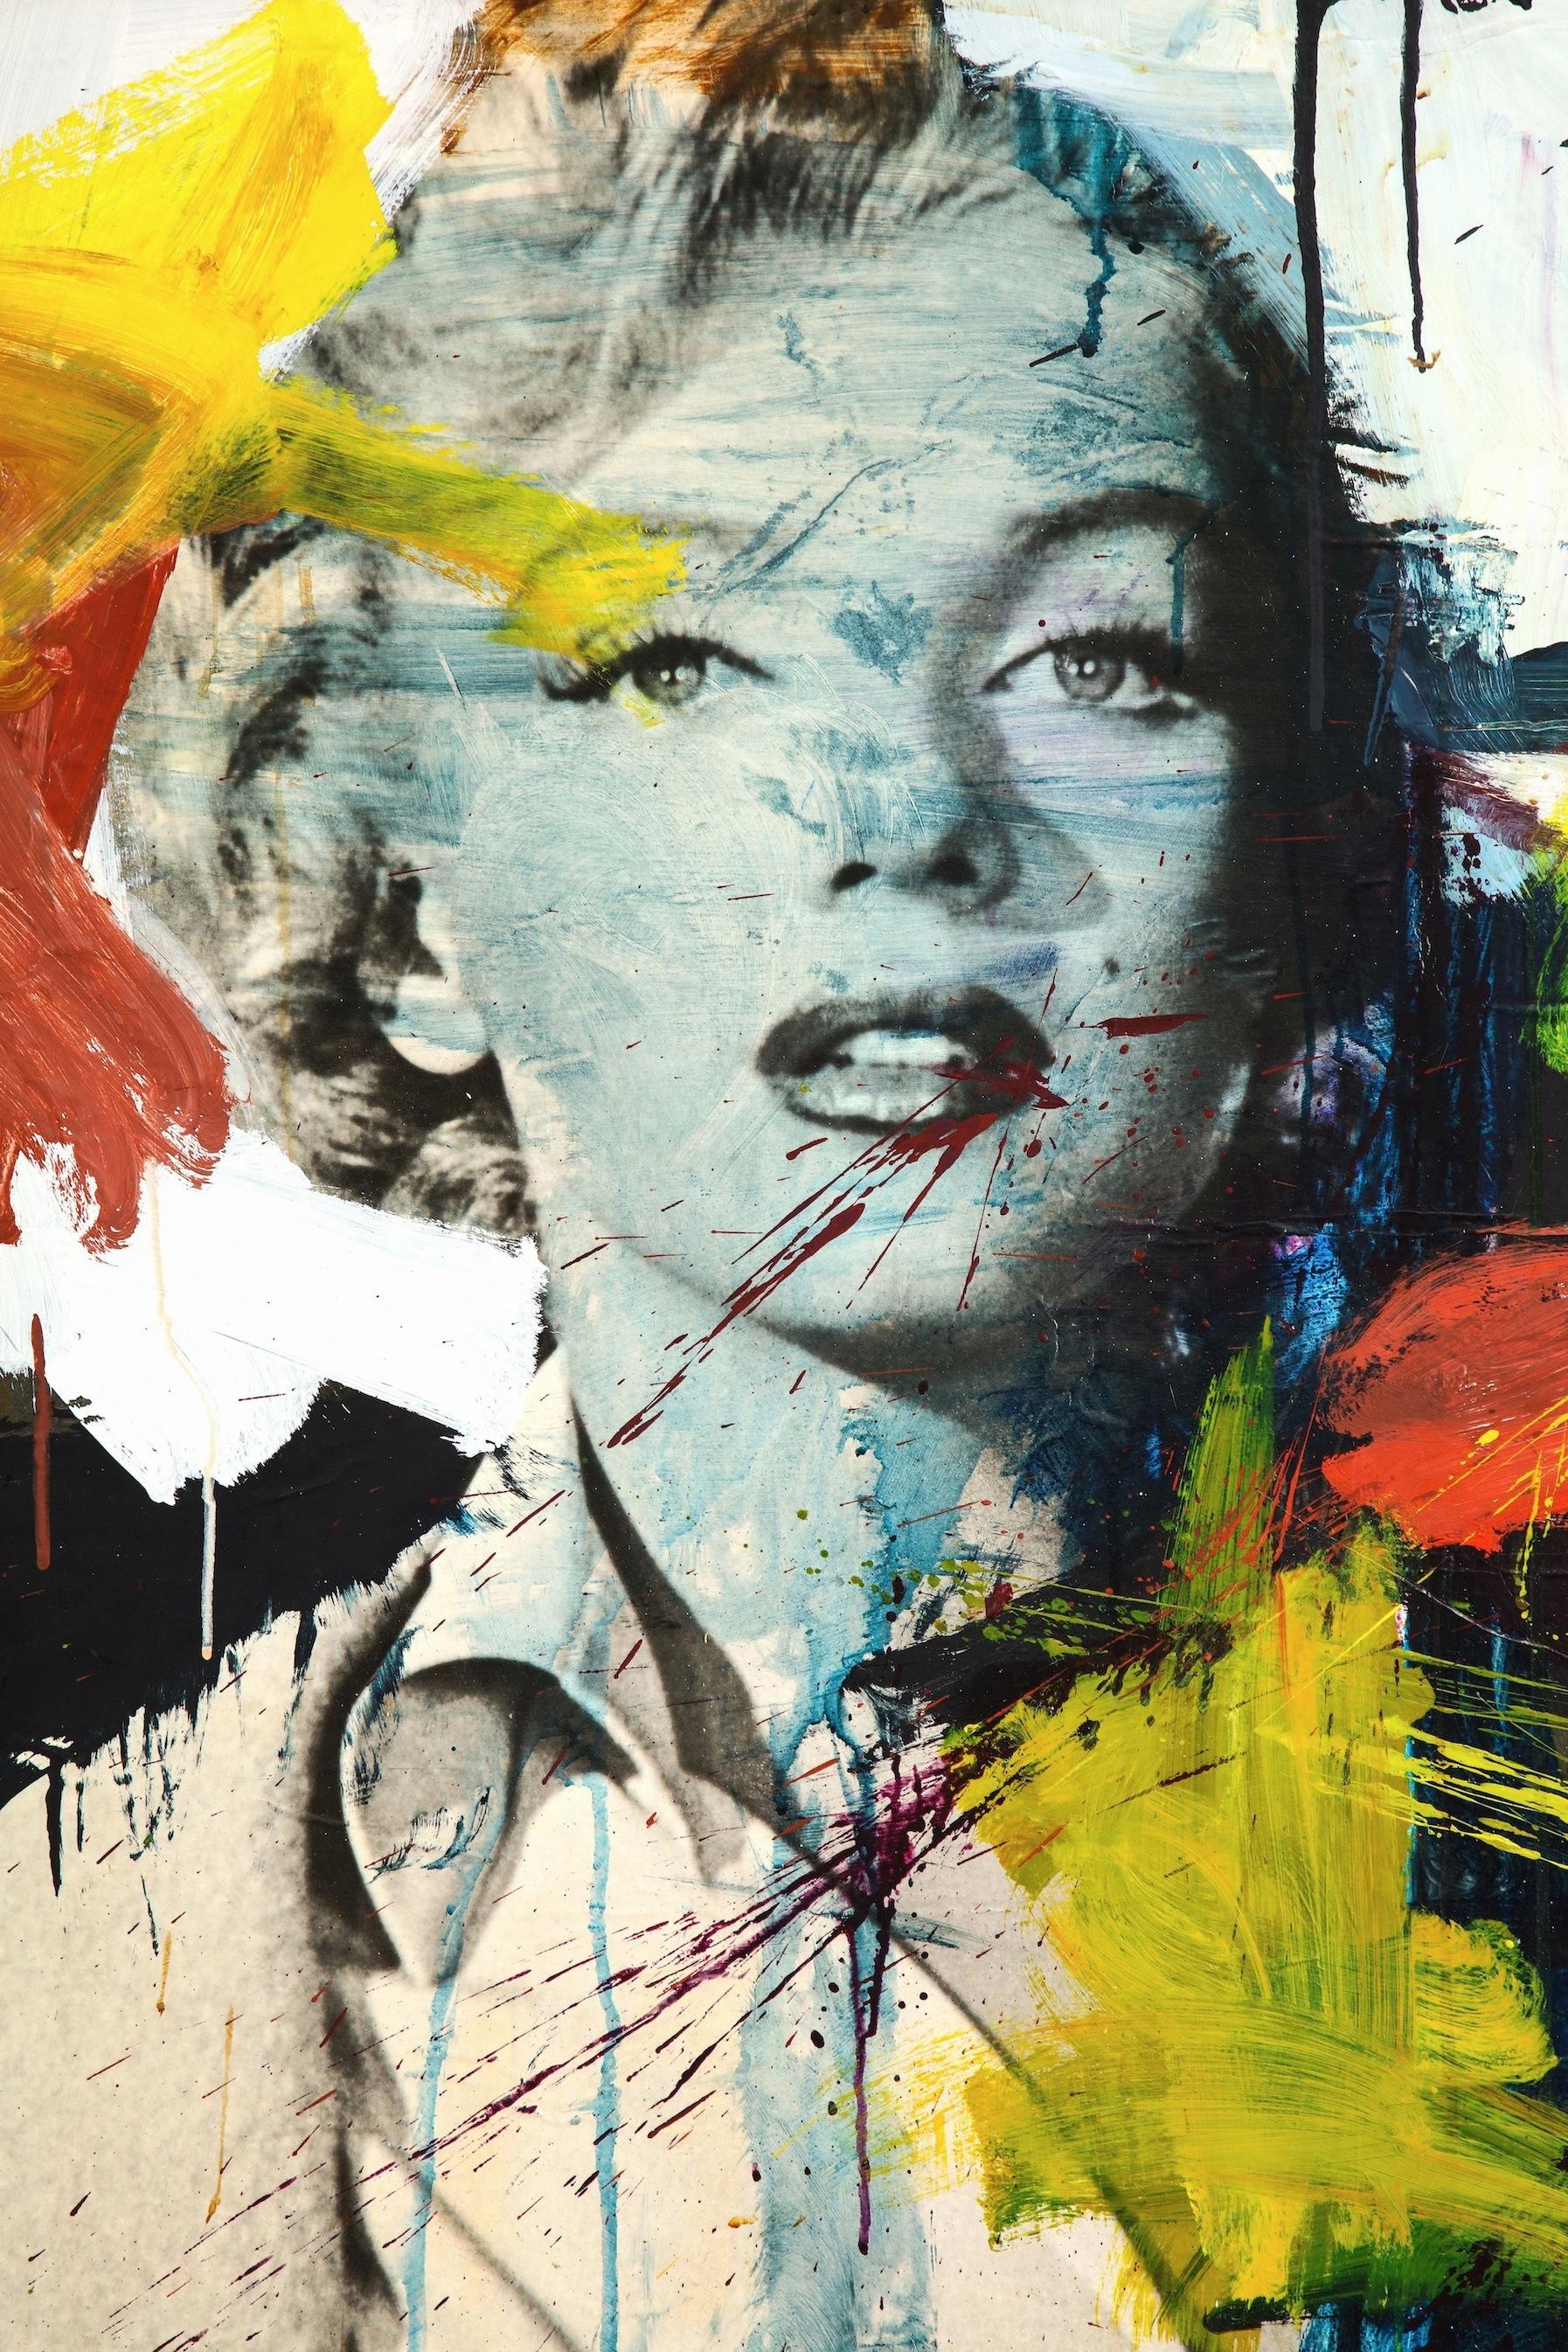 From the mid-1960s comes this fabulous large collage and painting titled Norma Jean of an early Marilyn Monroe. It's a mixed media collage of paper with acrylic paint that was laid down to canvas by a NY artist. The image of Marilyn is paper where